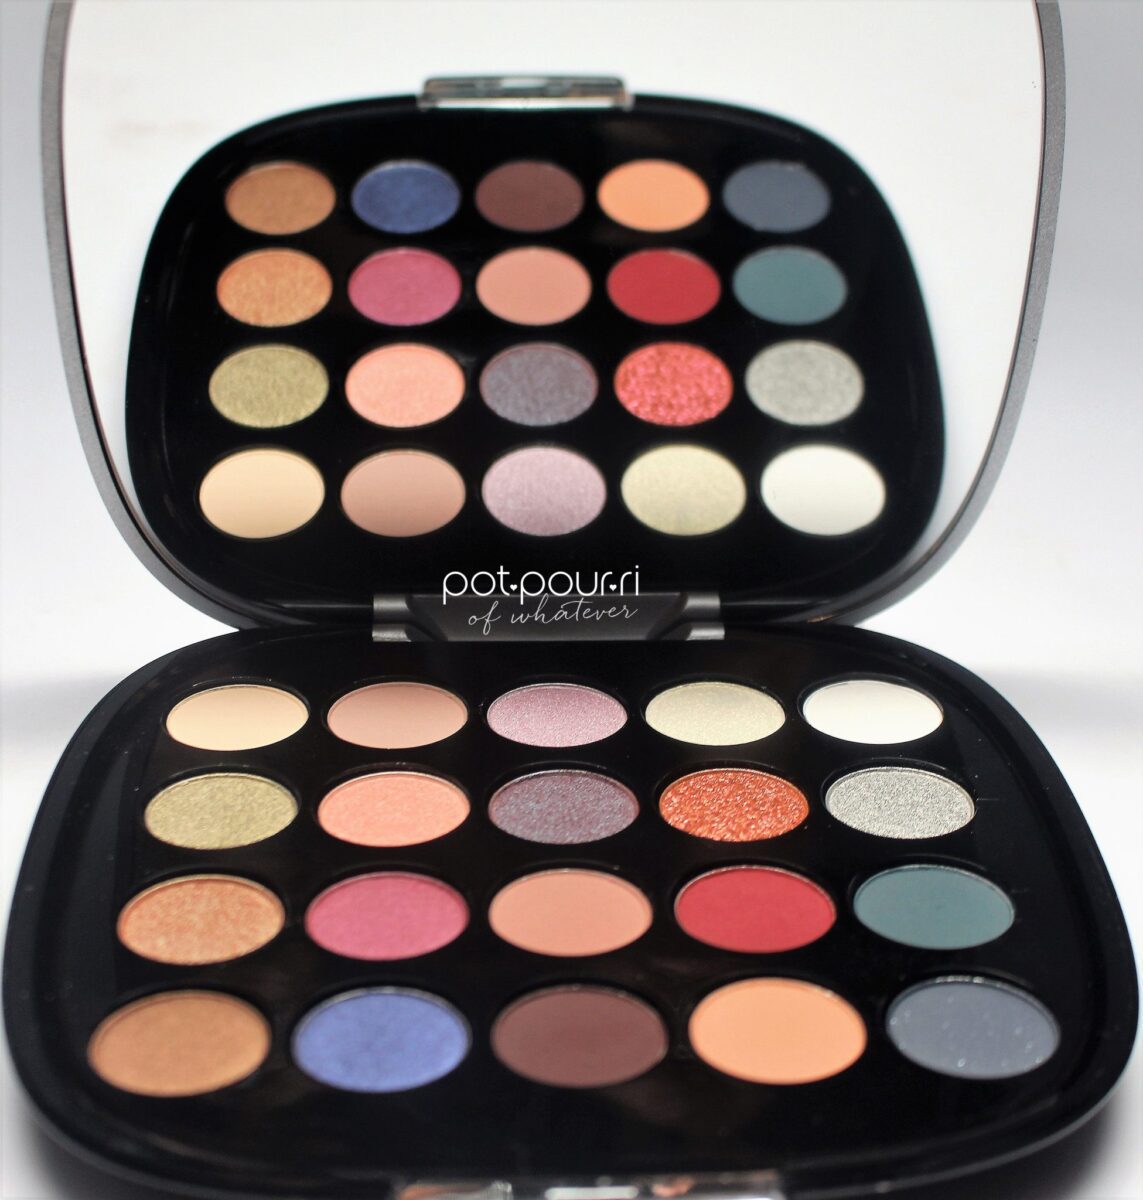 a large mirror and 20 beautiful eyeshadow colors are inside the palette